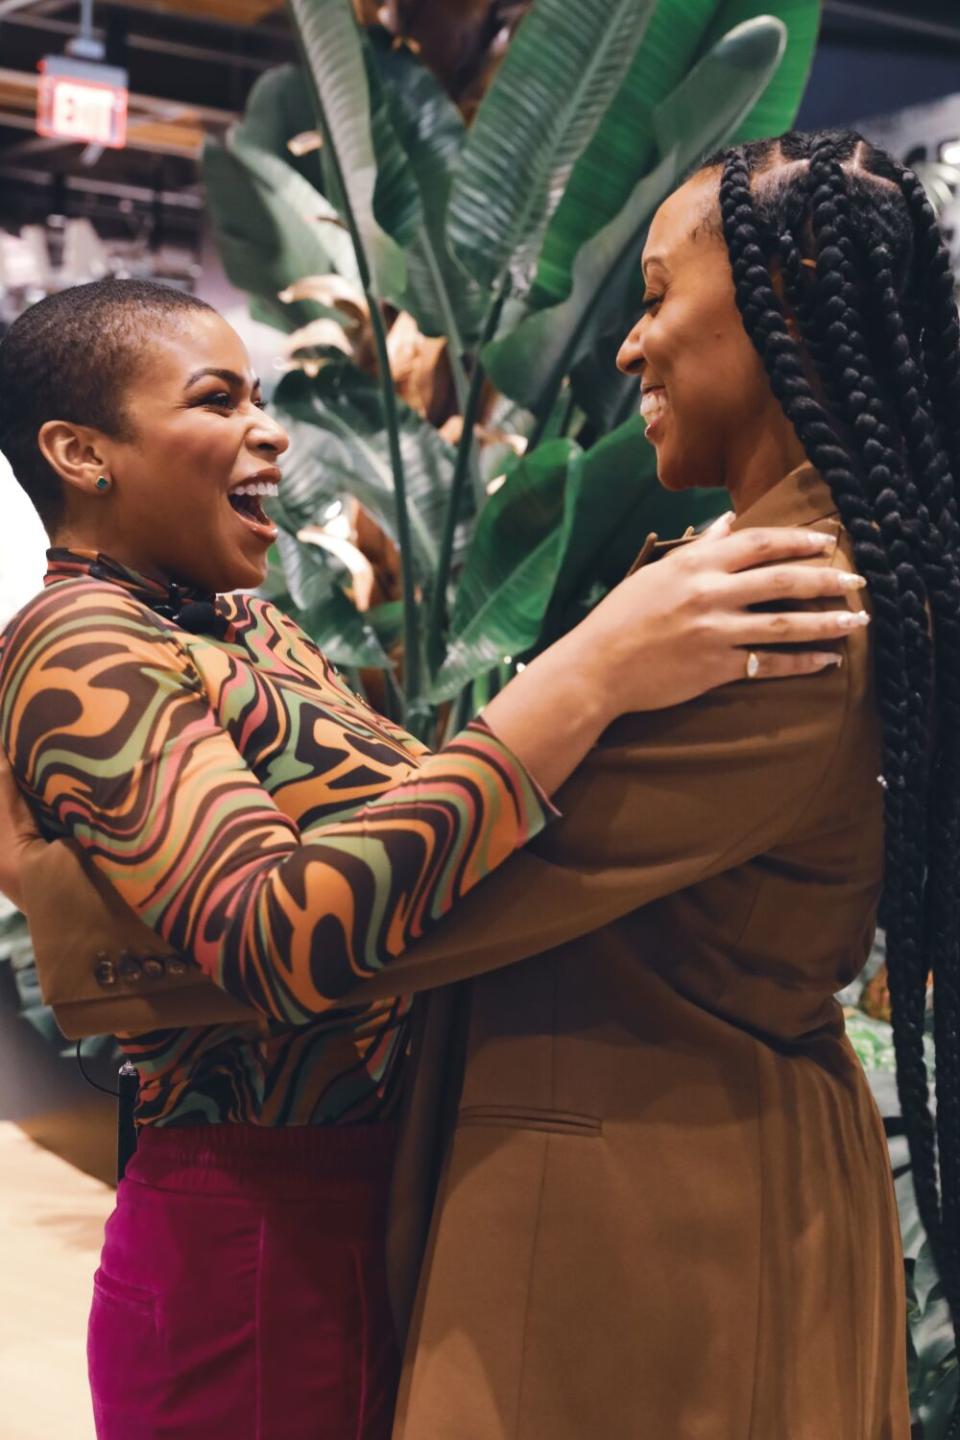 Two Black women smile big and embrace each other